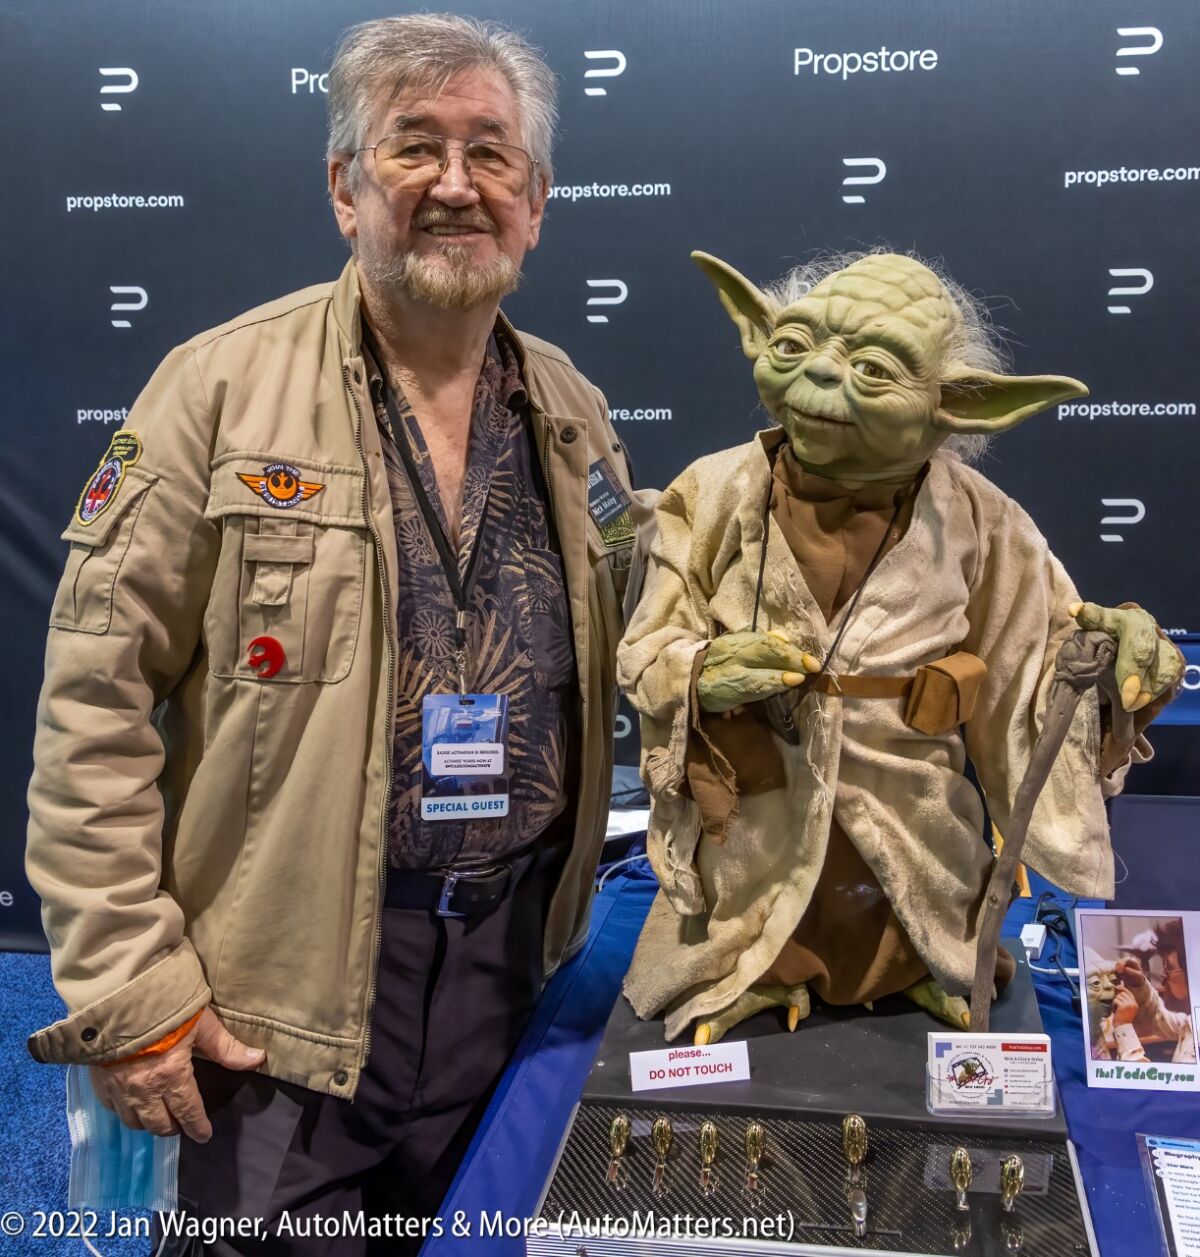 Nick Maley: He collaborated in the creation of the original Yoda & built this recreation